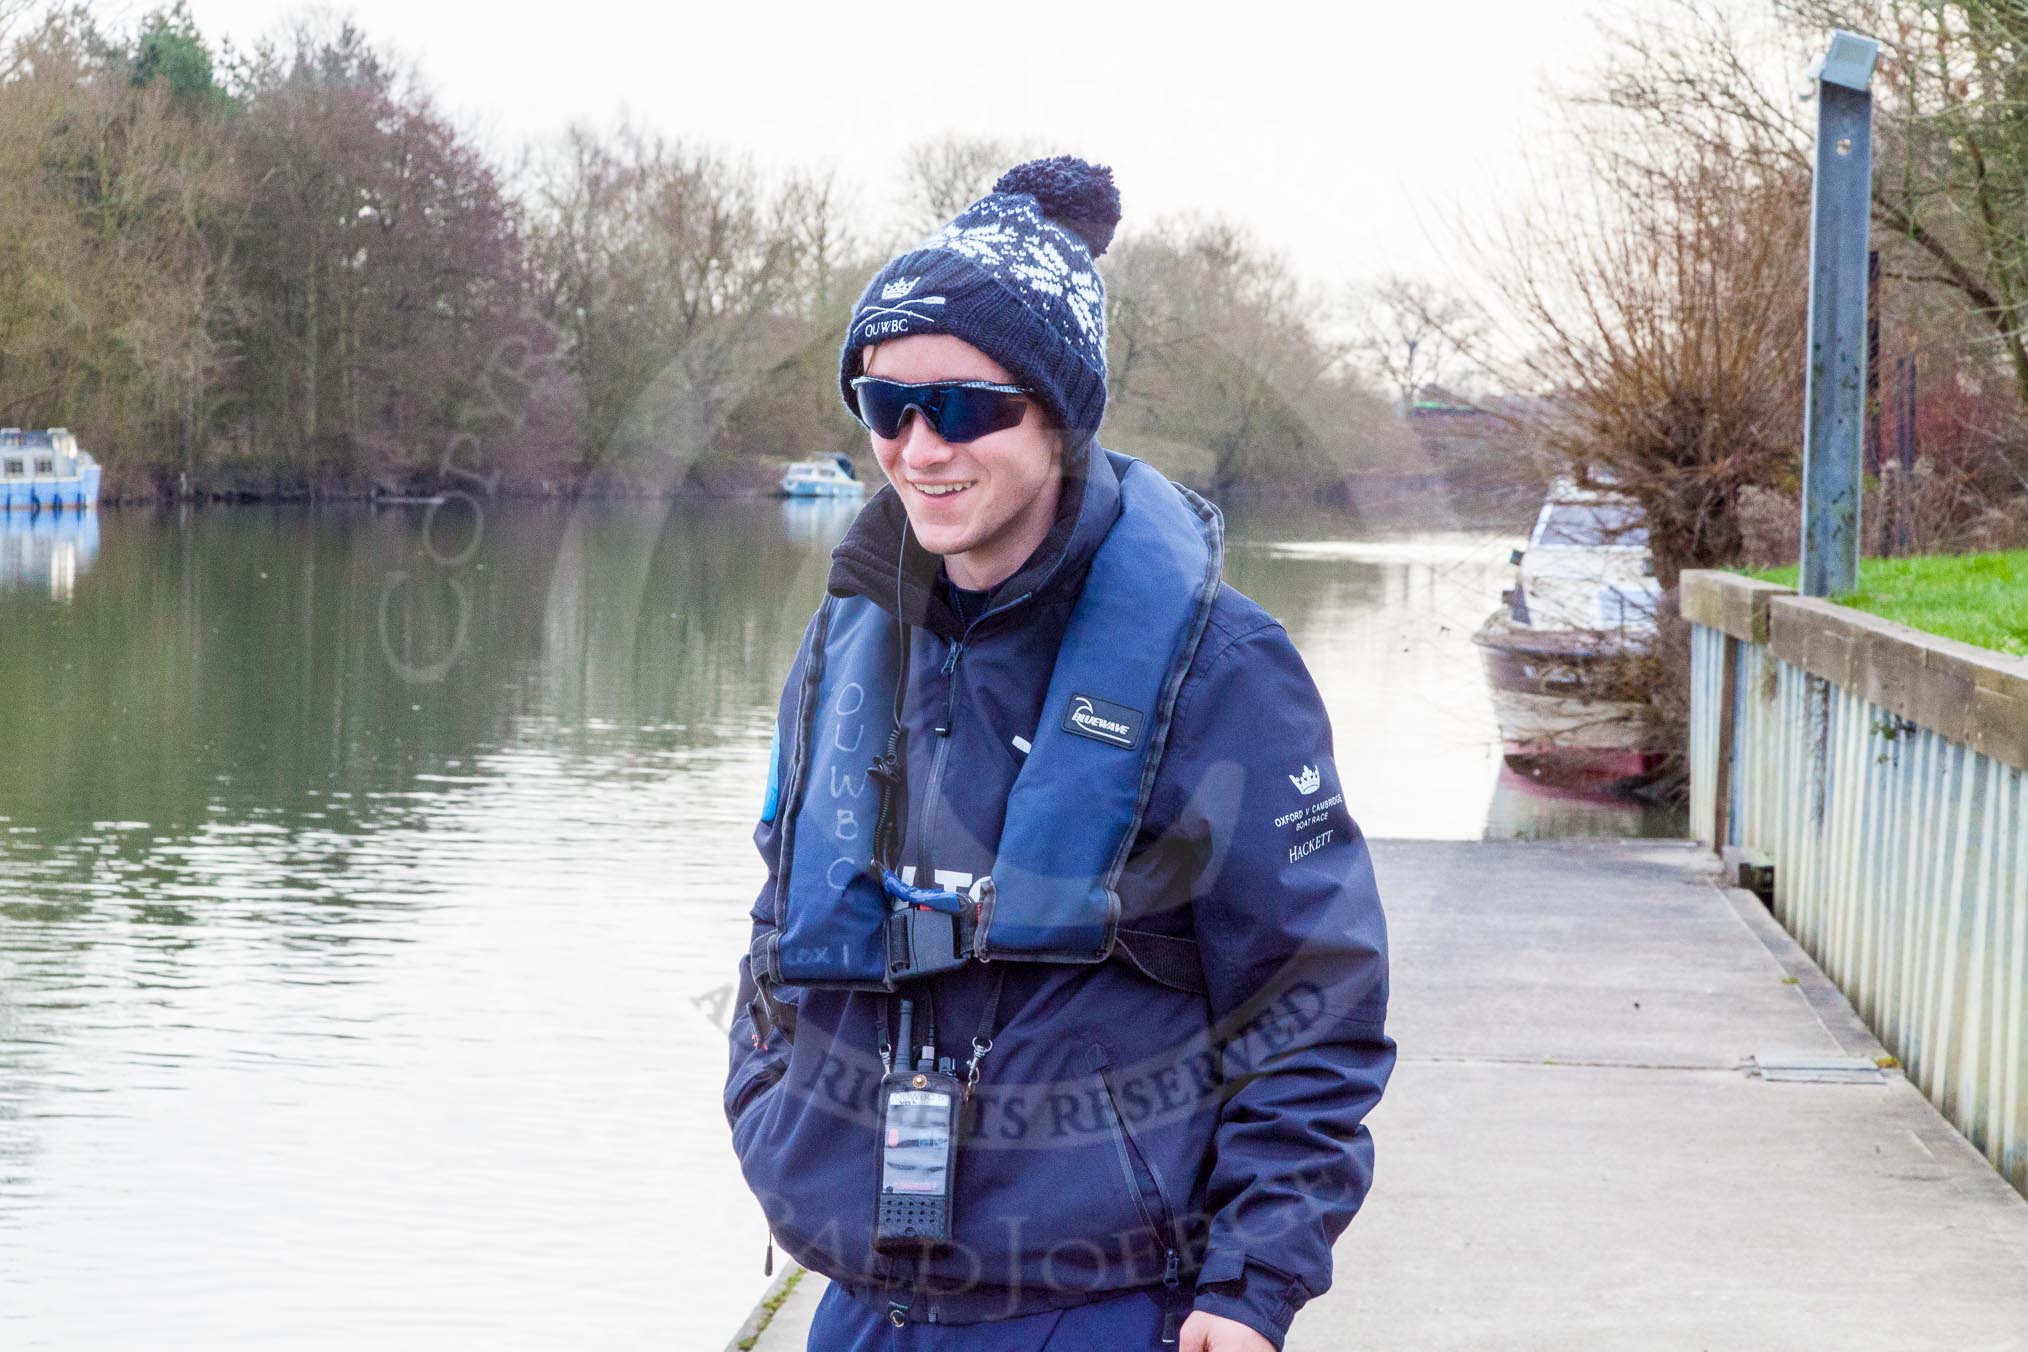 The Boat Race season 2016 - OUWBC training Wallingford: OUWBC cox Will Smith before taking his seat in Osiris, the reserve boat..
River Thames,
Wallingford,
Oxfordshire,

on 29 February 2016 at 15:18, image #38